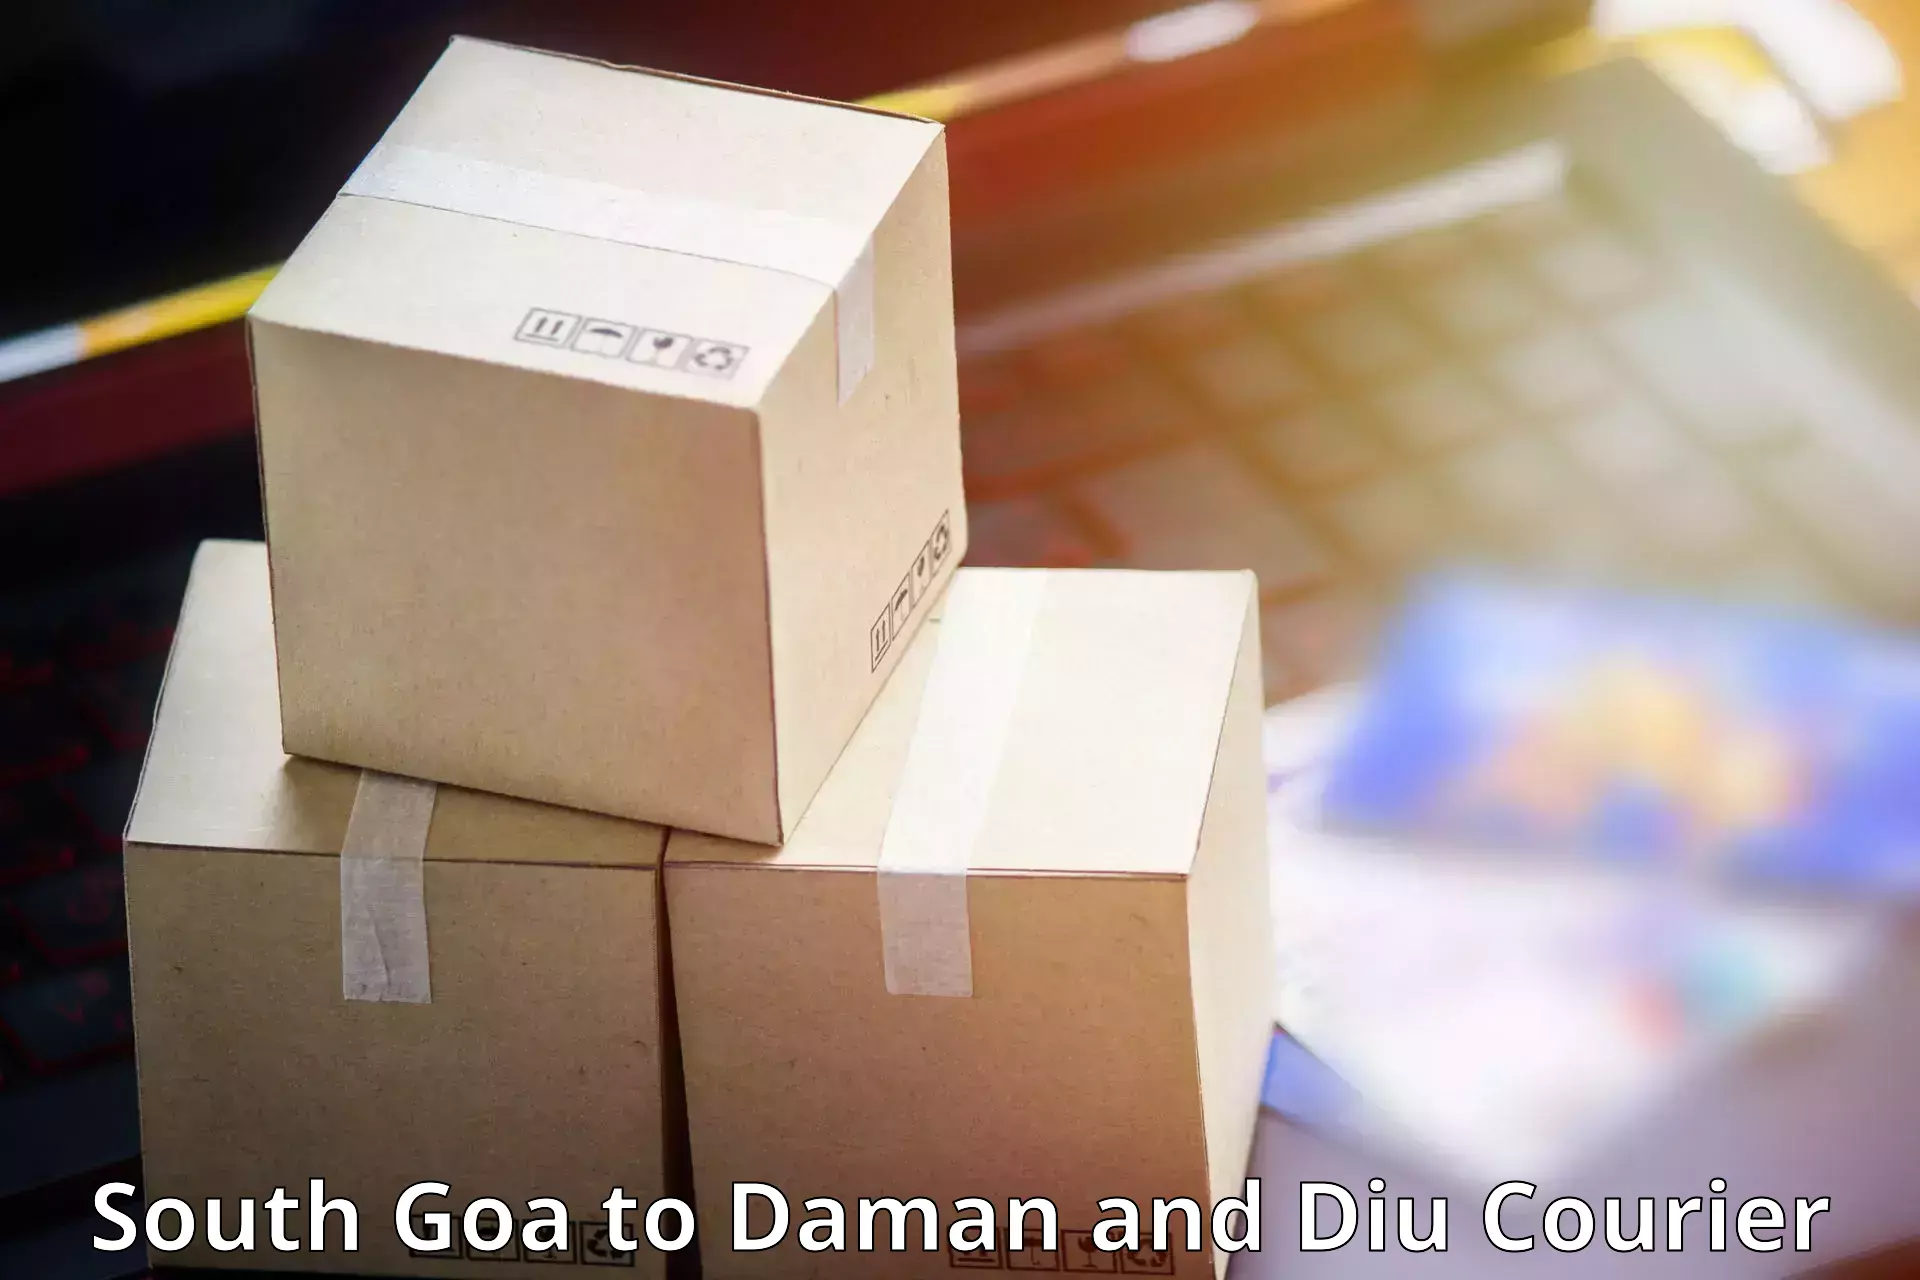 International courier rates South Goa to Diu